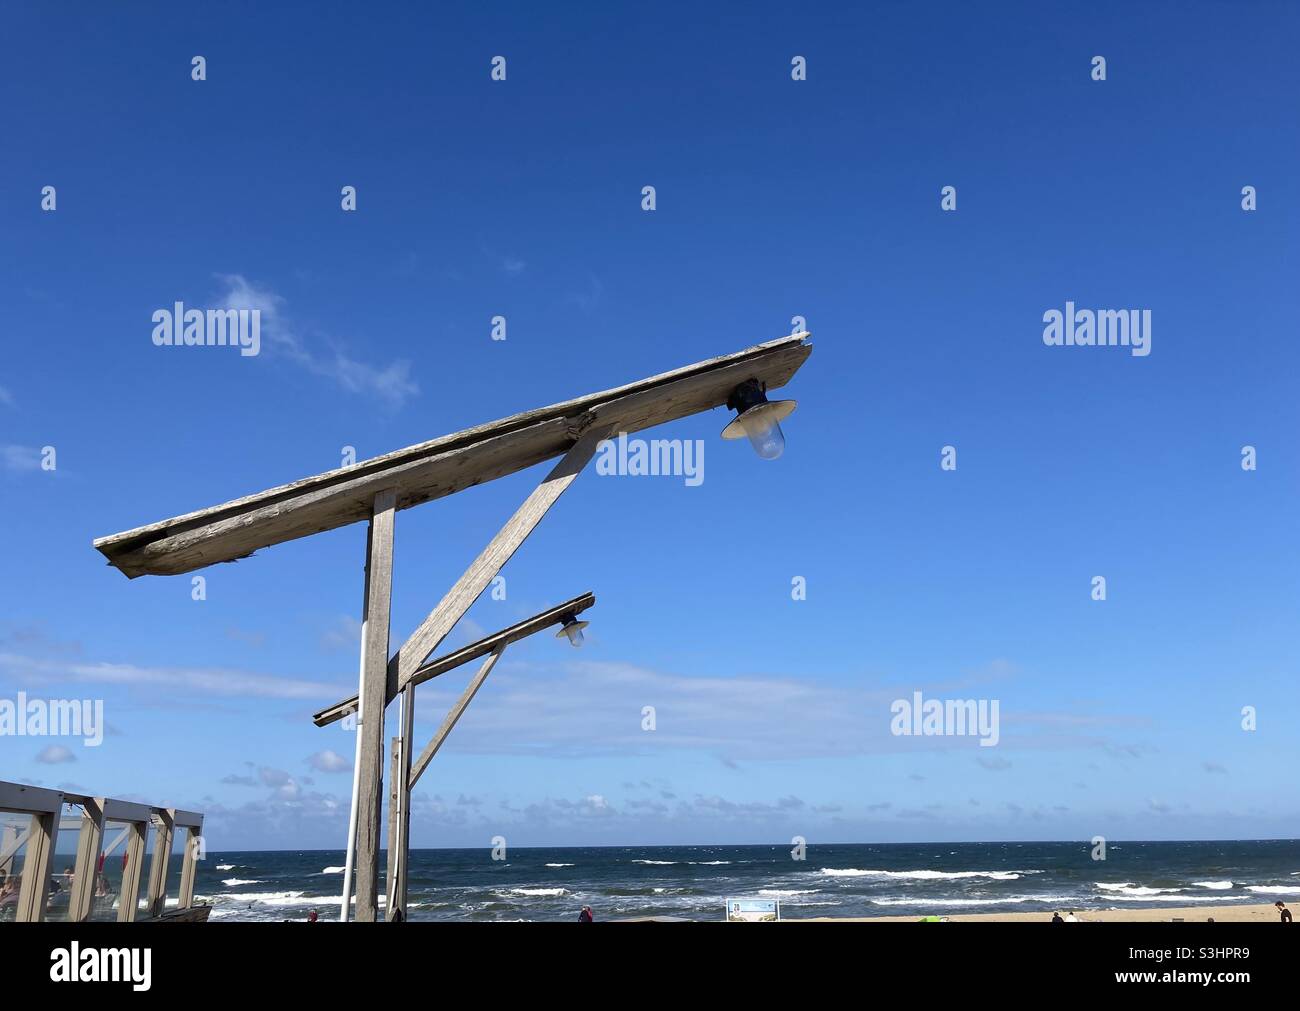 Two lamps with wooden frames on the beach with blue sky in the background Stock Photo